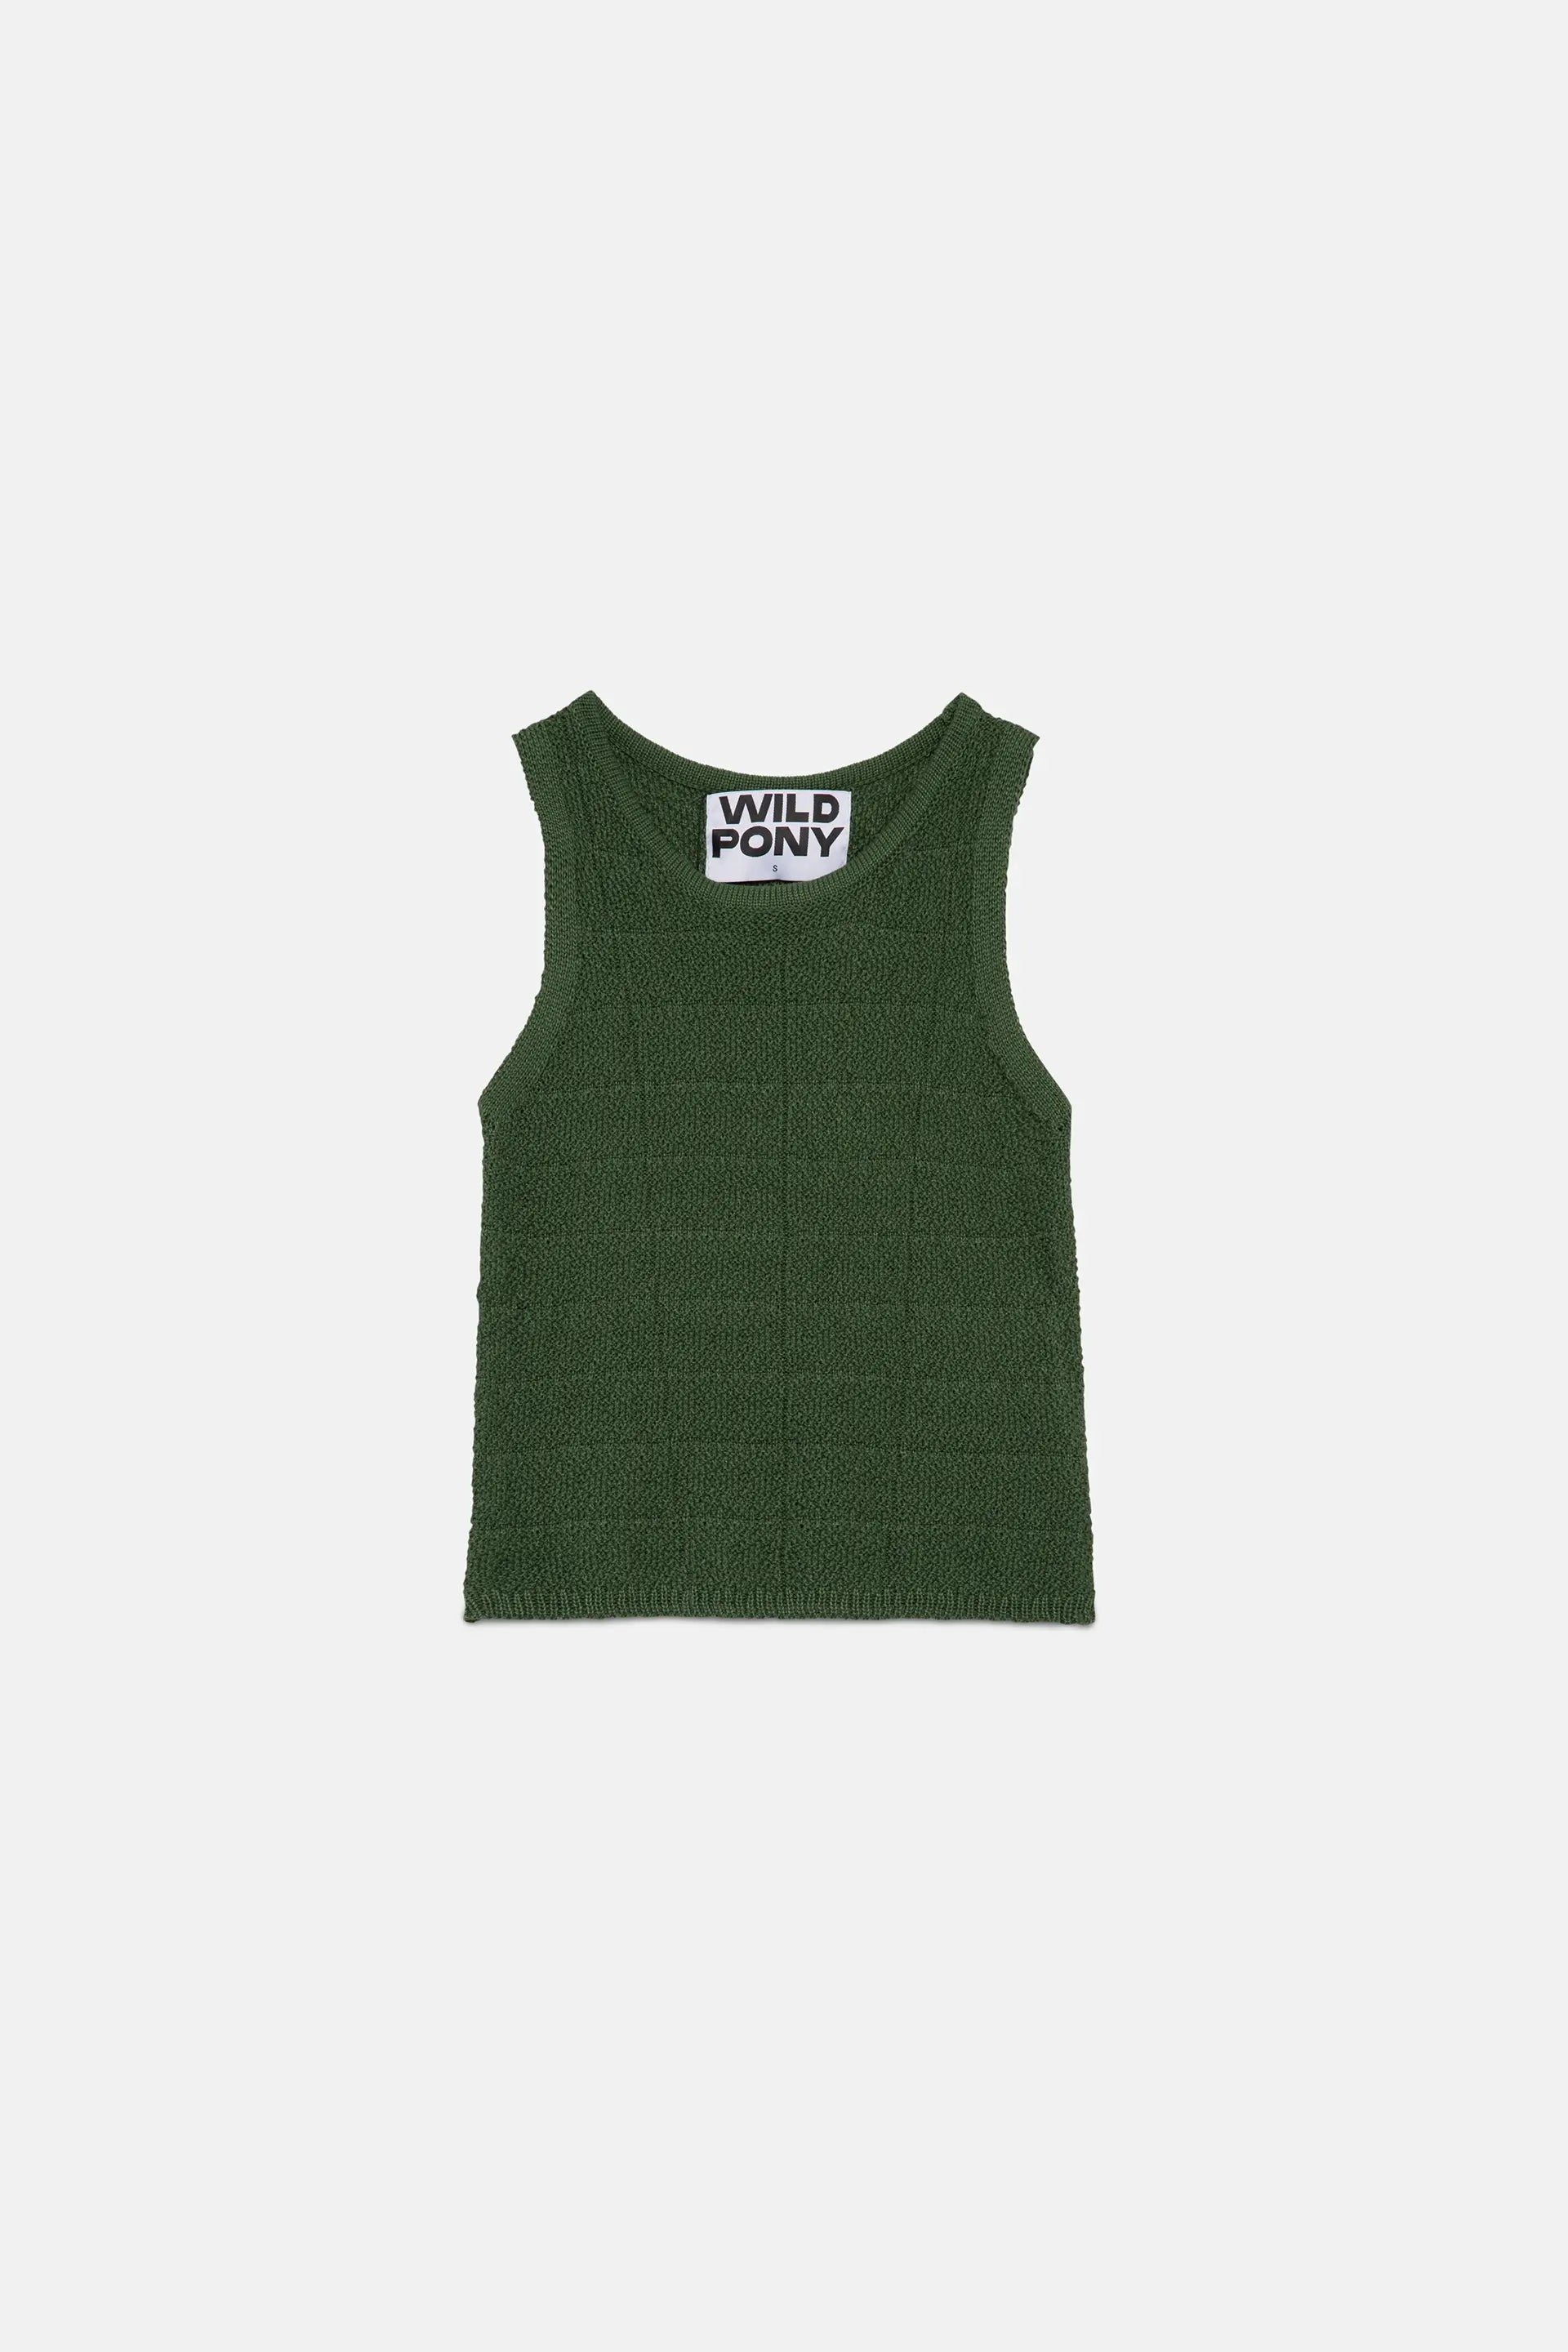 Wild Pony Green sleeveless knit top - clever alice